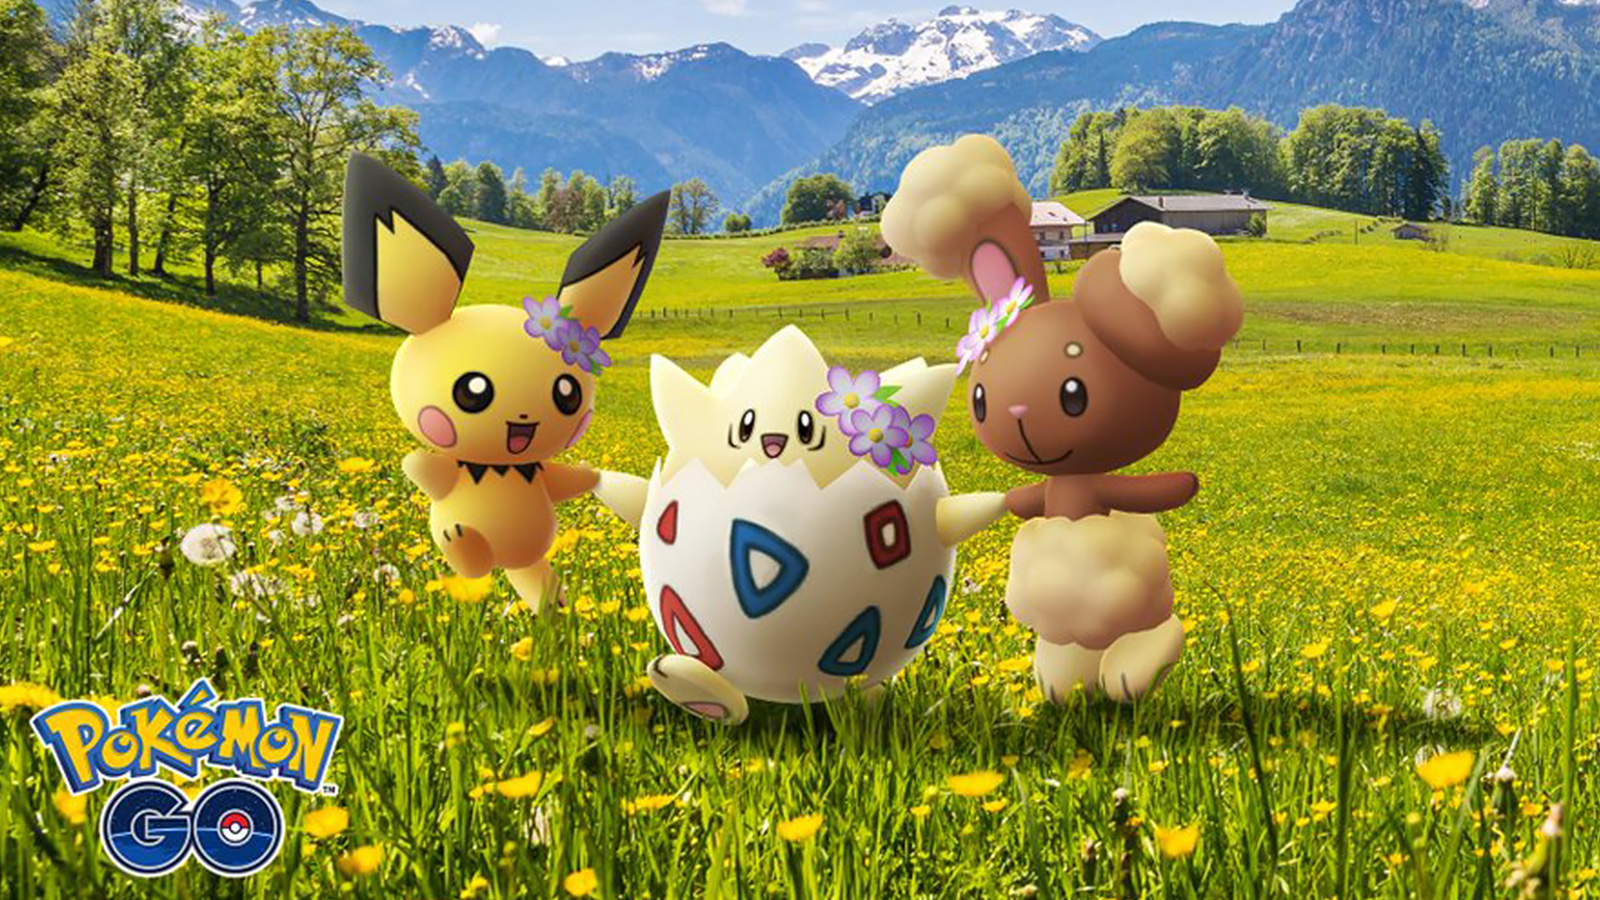 Pikachu and other Pokémon in a field